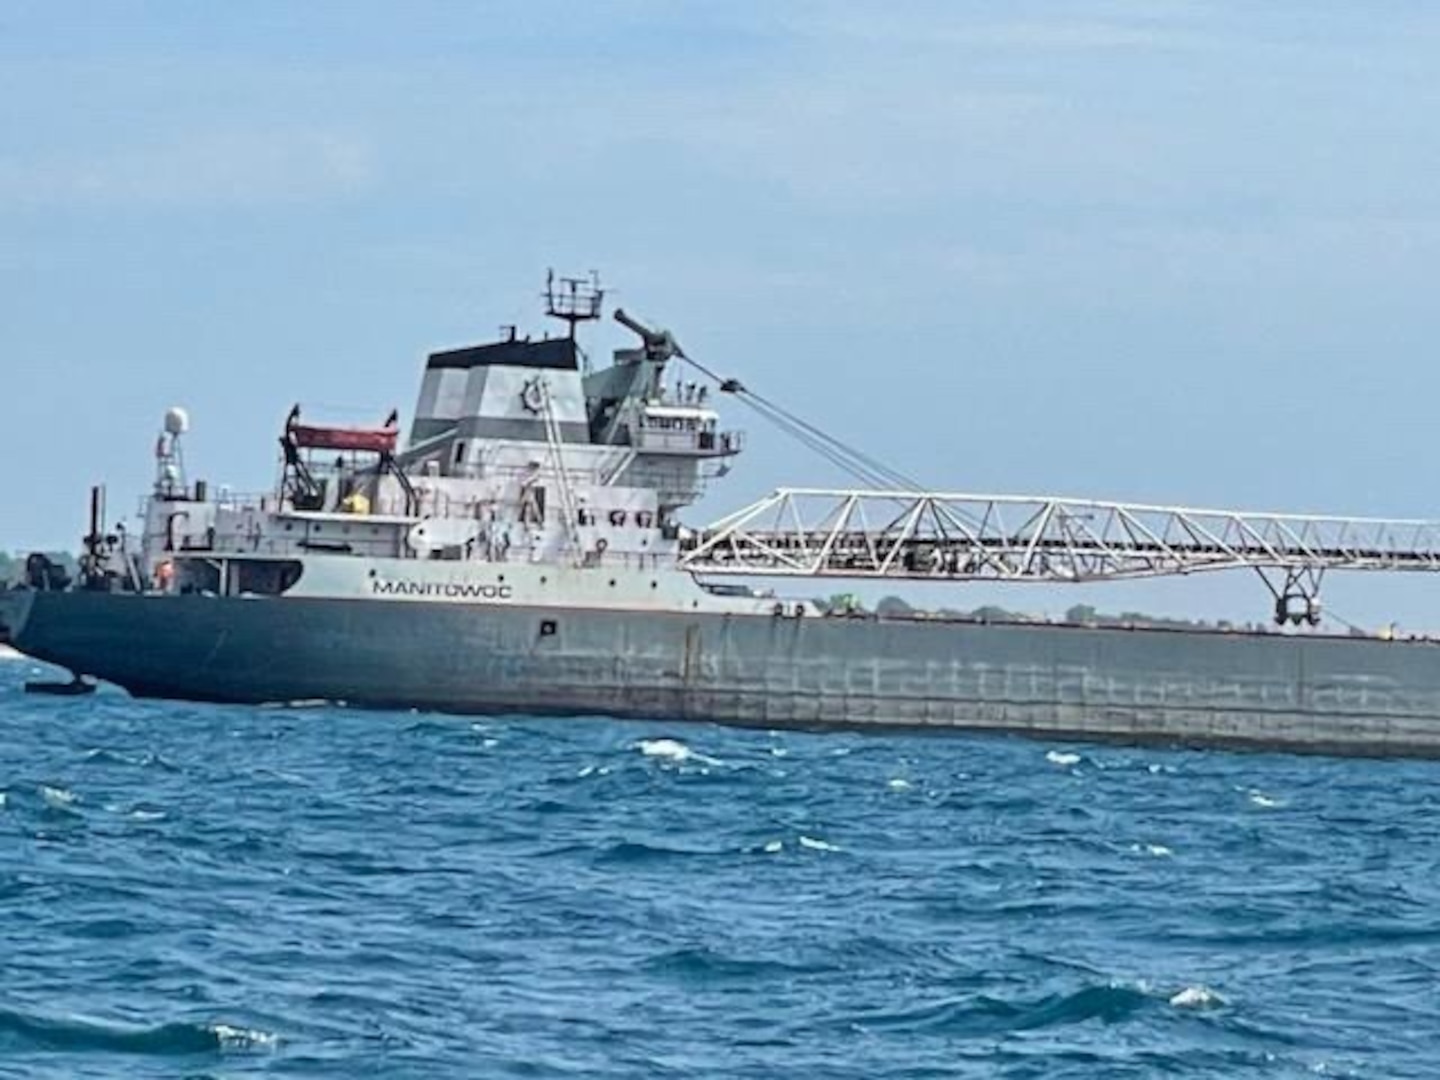 At approximately 2:50 p.m. the 612’ bulk carrier motor vessel Manitowoc reported a hull breach on its starboard diesel tank. The maximum spill potential is 45,174 gallons of diesel.